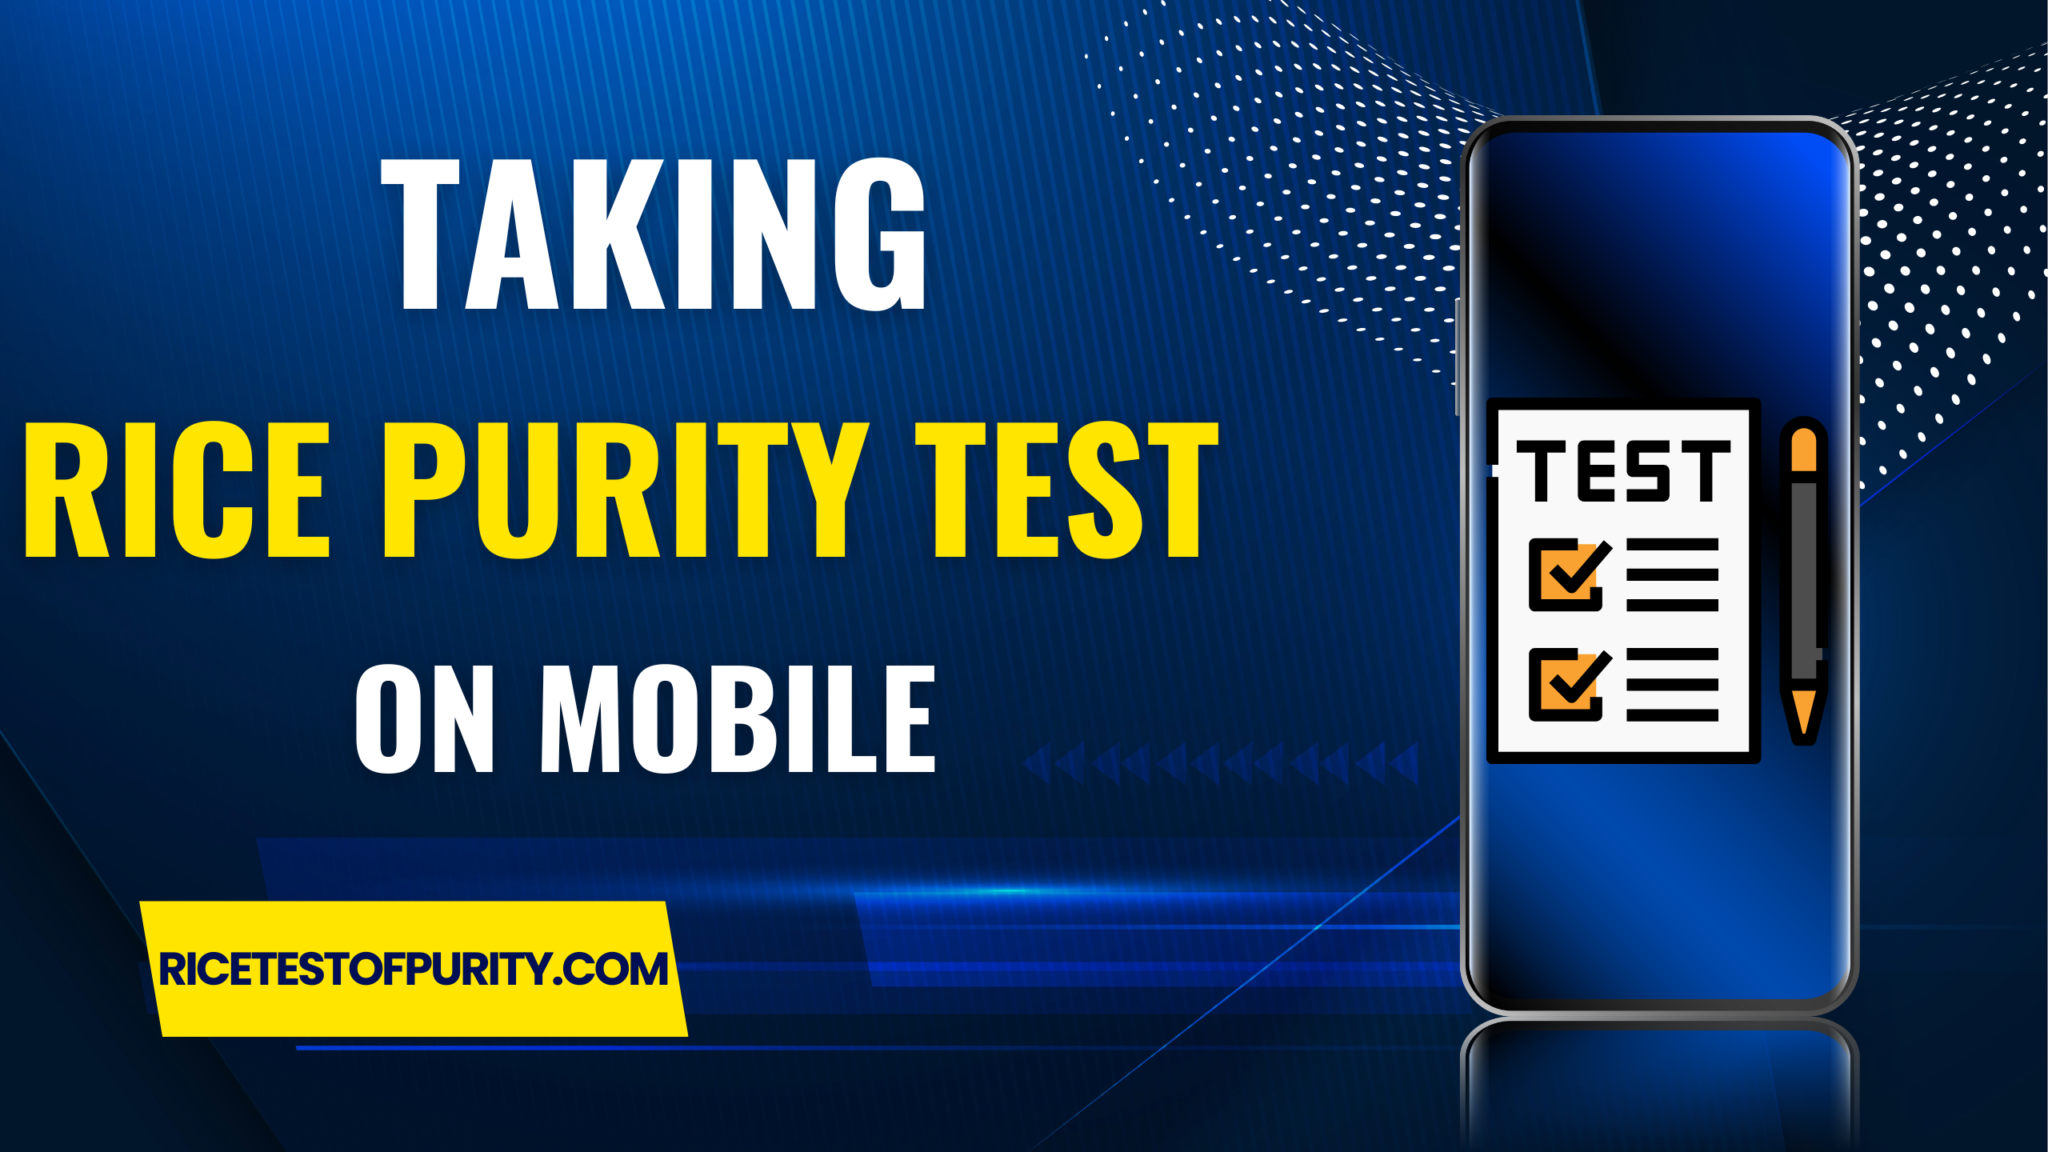 Rice Purity Test on Mobile